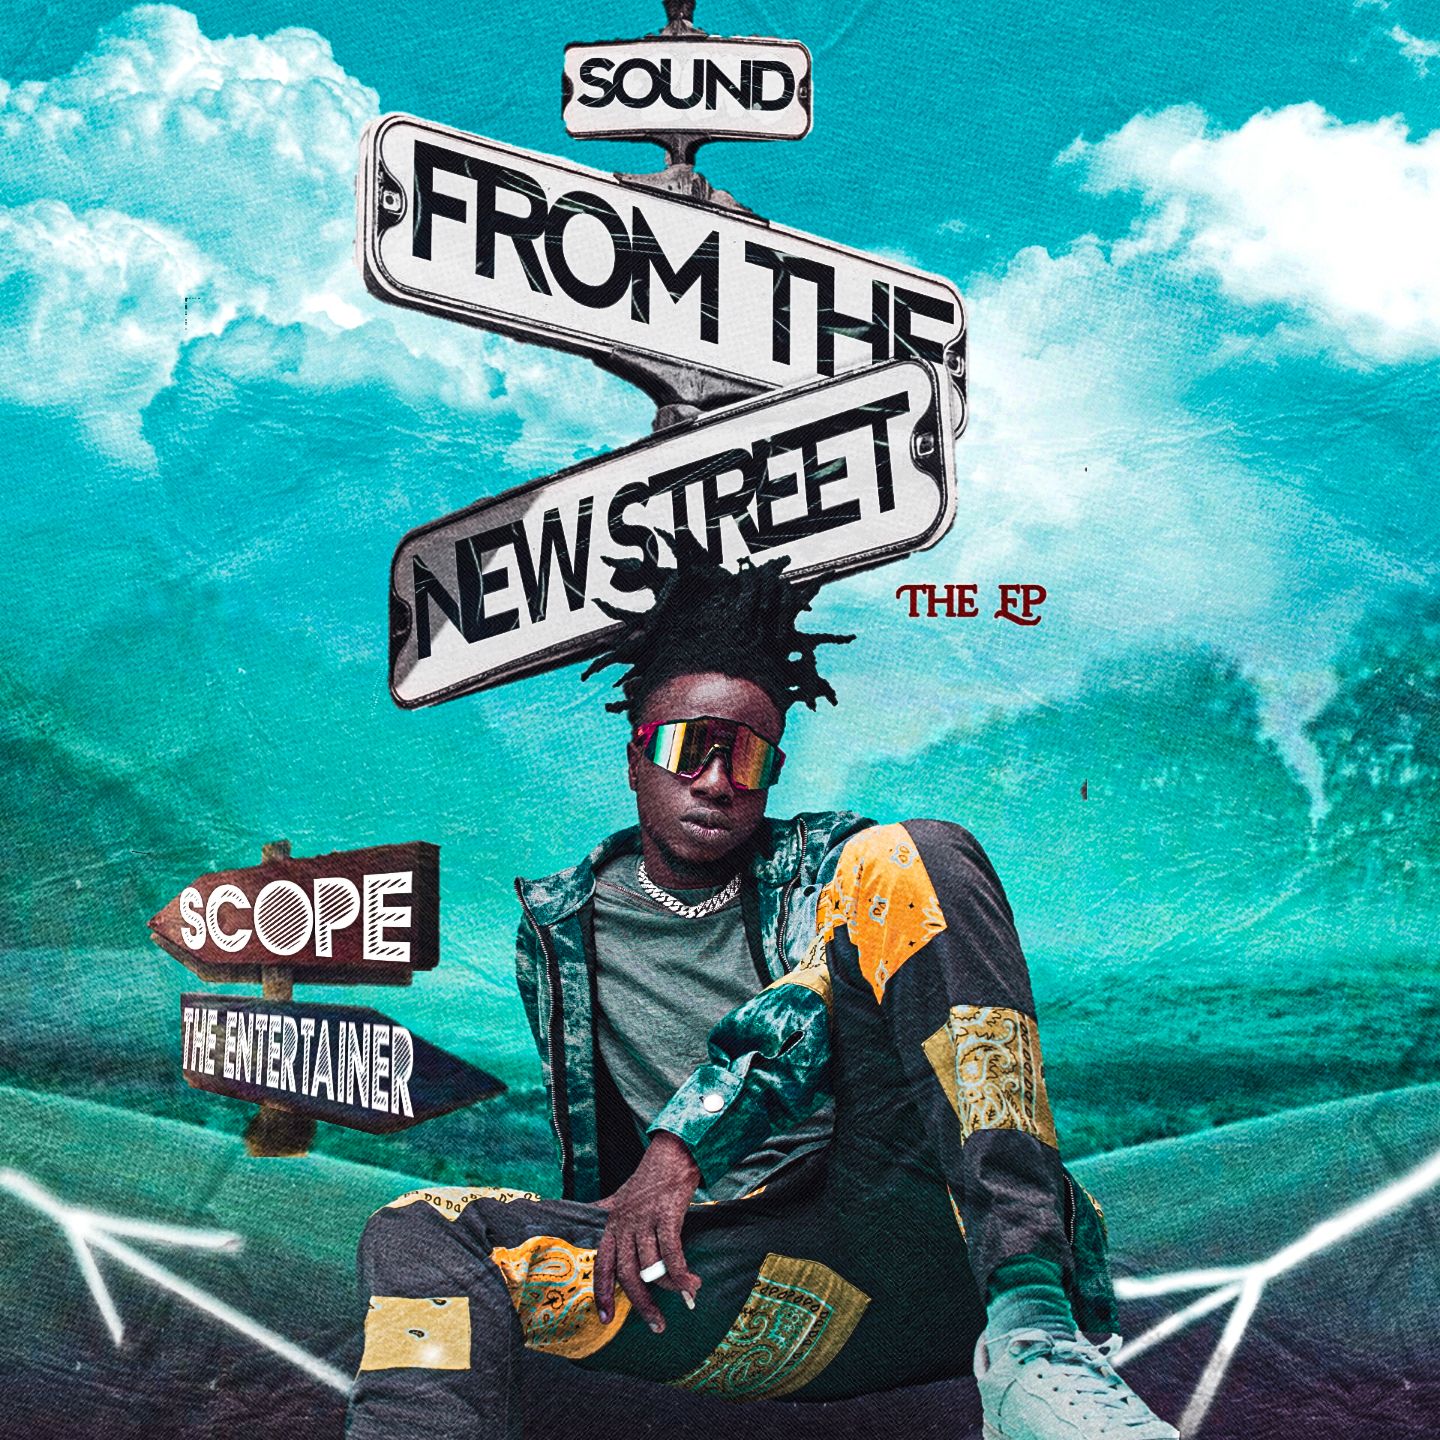 EP: Scope - Sound from The New Street (Full Album)